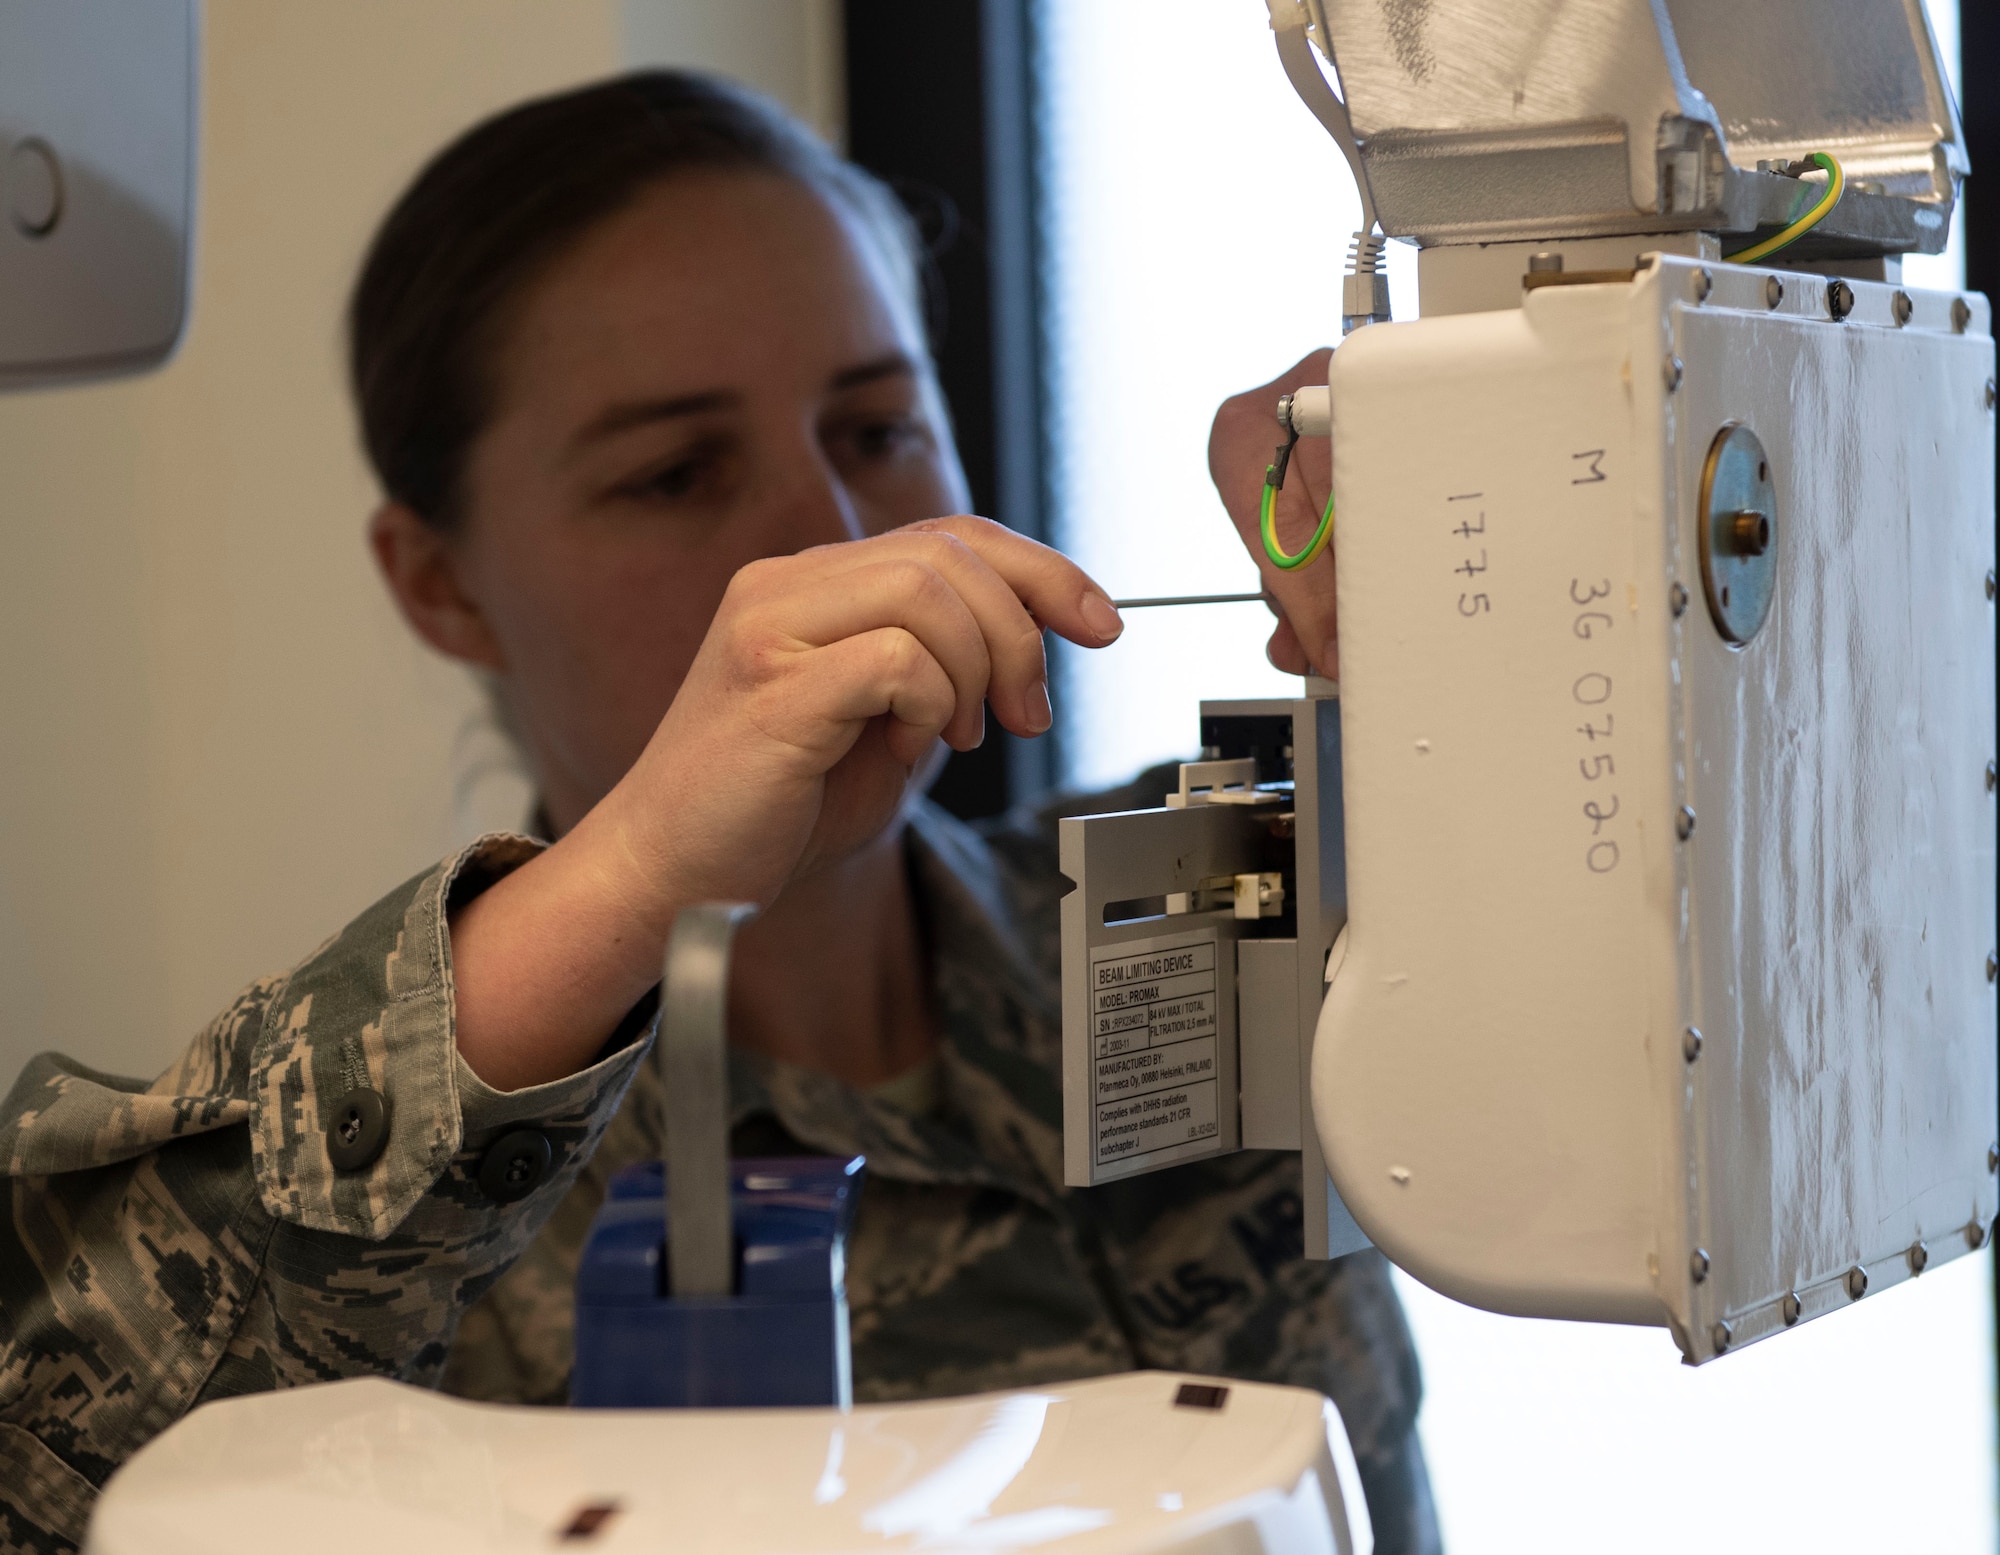 U.S. Air Force Staff Sgt. Heather Merrill, 52nd Medical Group biomedical equipment technician, checks a dental x-ray machine at Spangdahlem Air Base, Germany, April 1, 2020. Ensuring that medical equipment works is essential to proper patient care. (U.S. Air Force photo by Senior Airman Melody W. Howley)